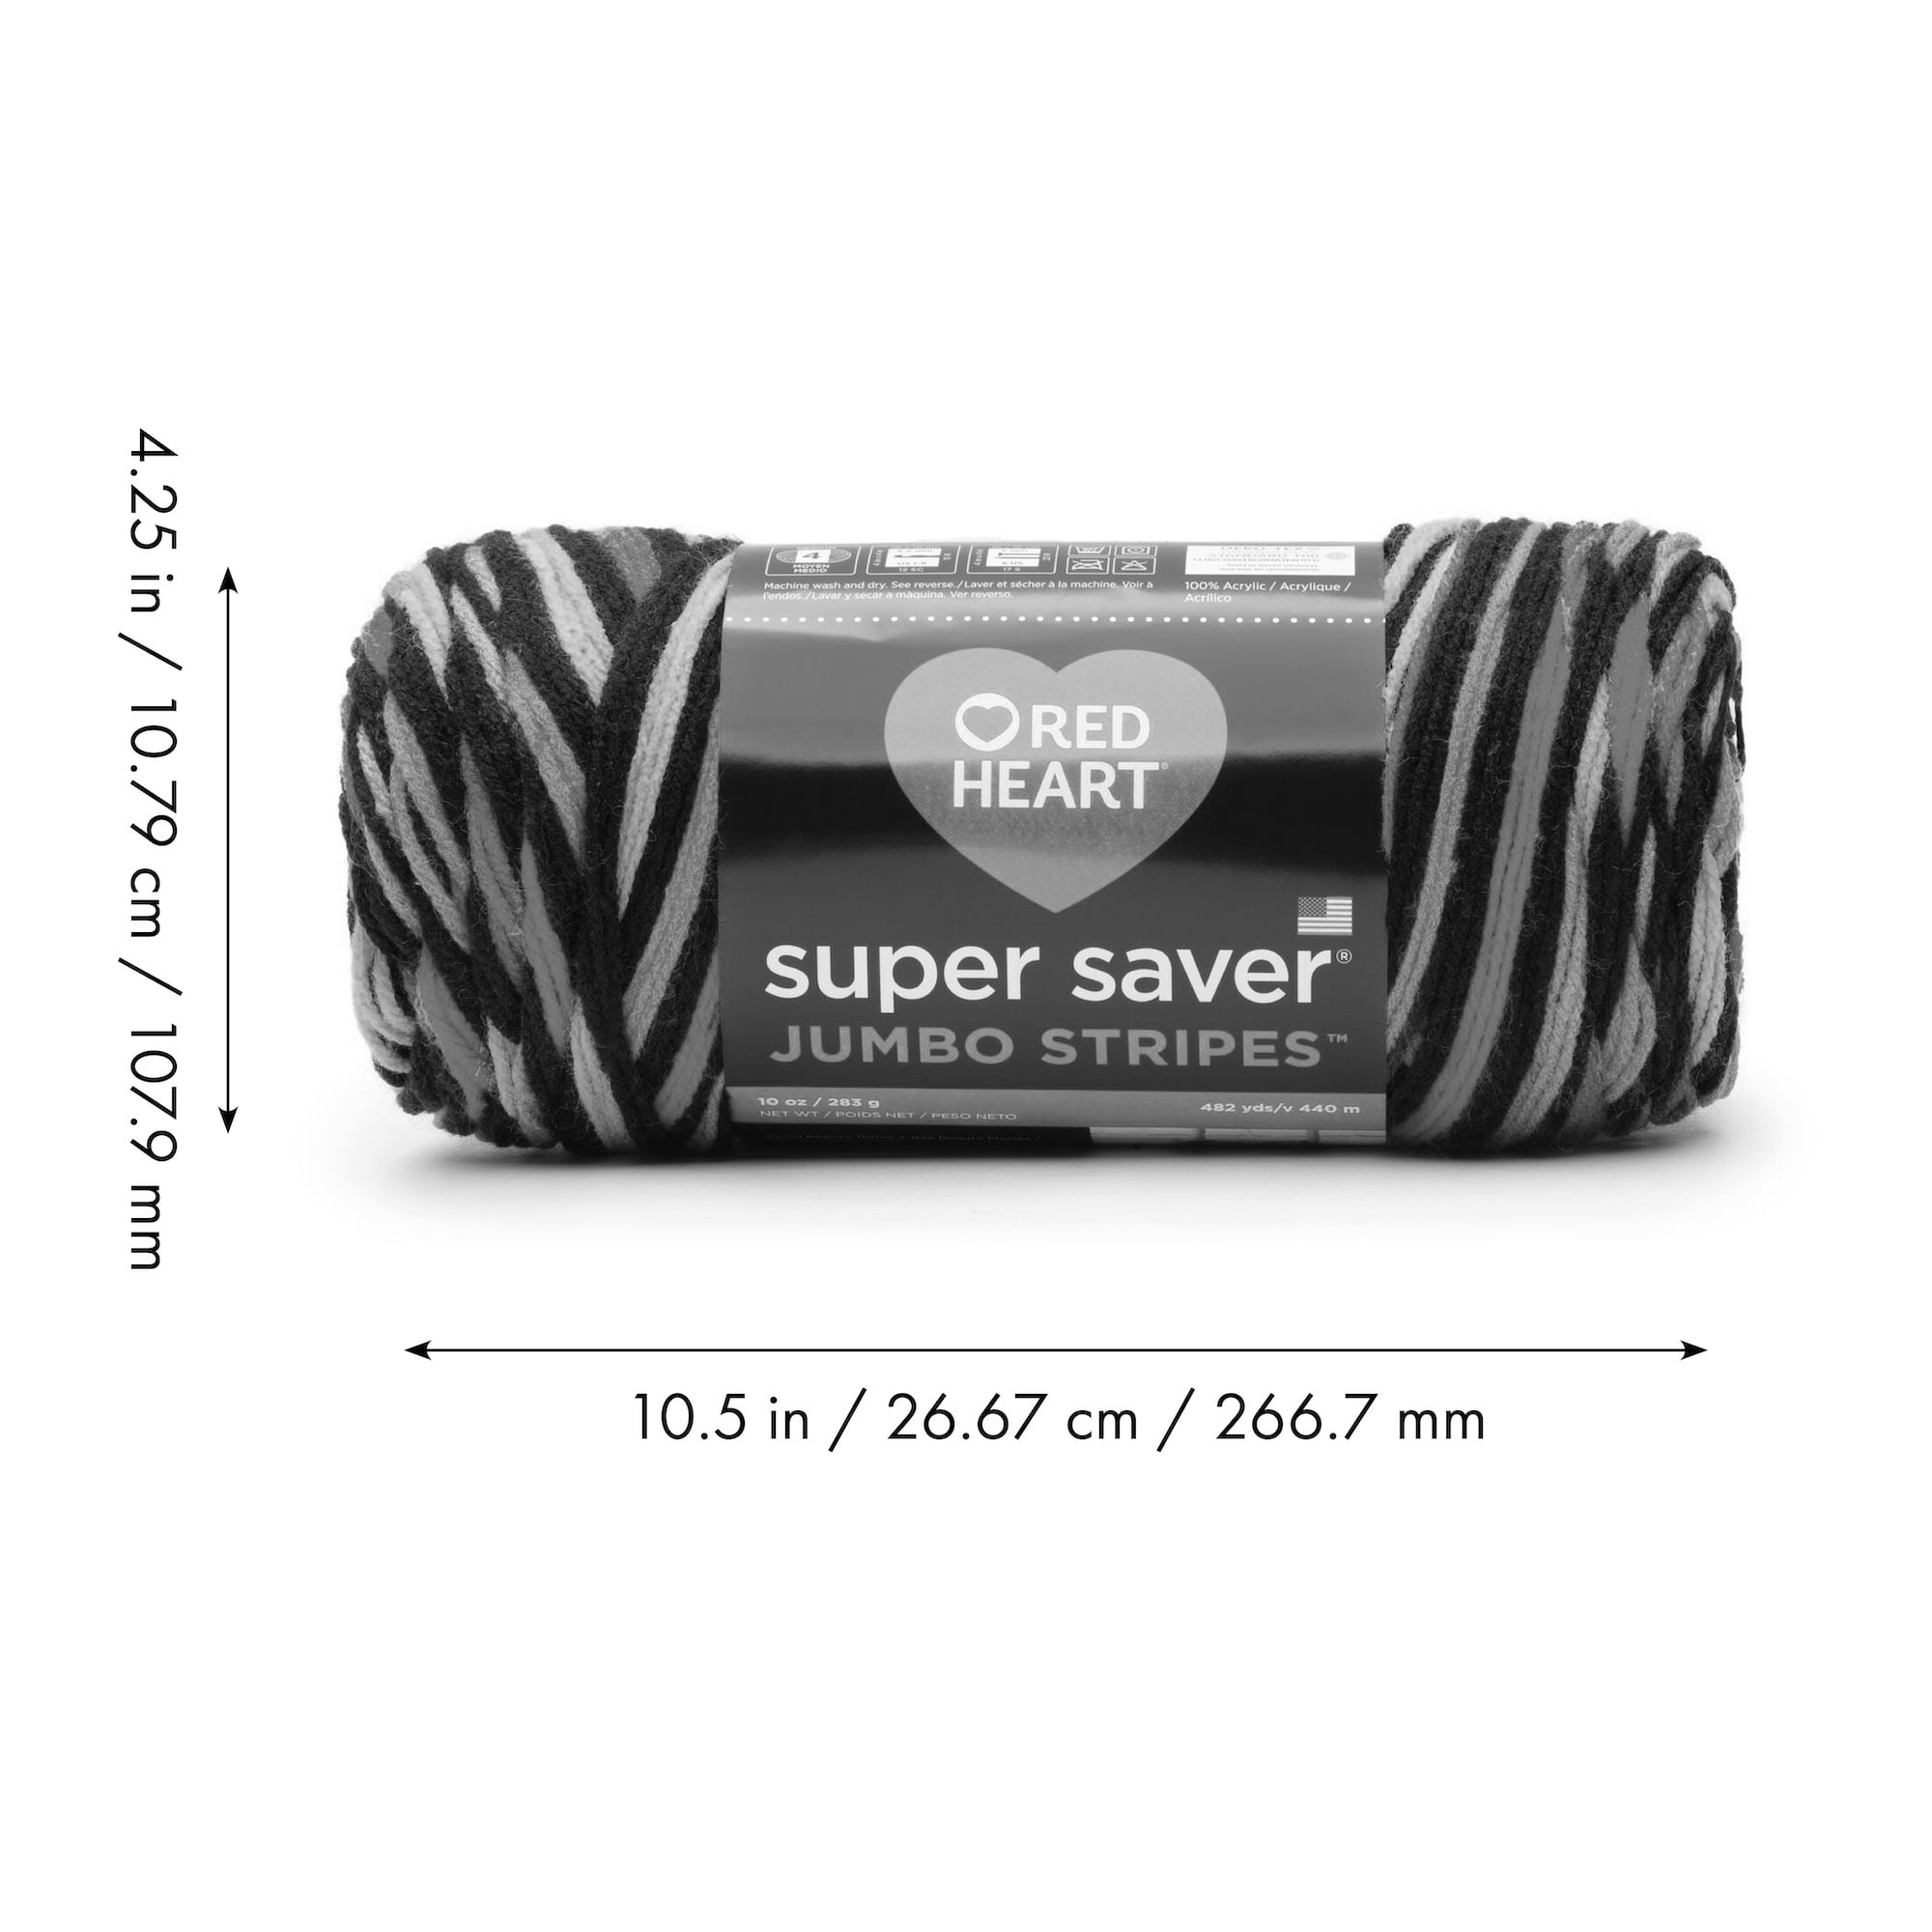 Red Heart® Super Saver® Yarn - Grey Heather, 1 ct - Pay Less Super Markets